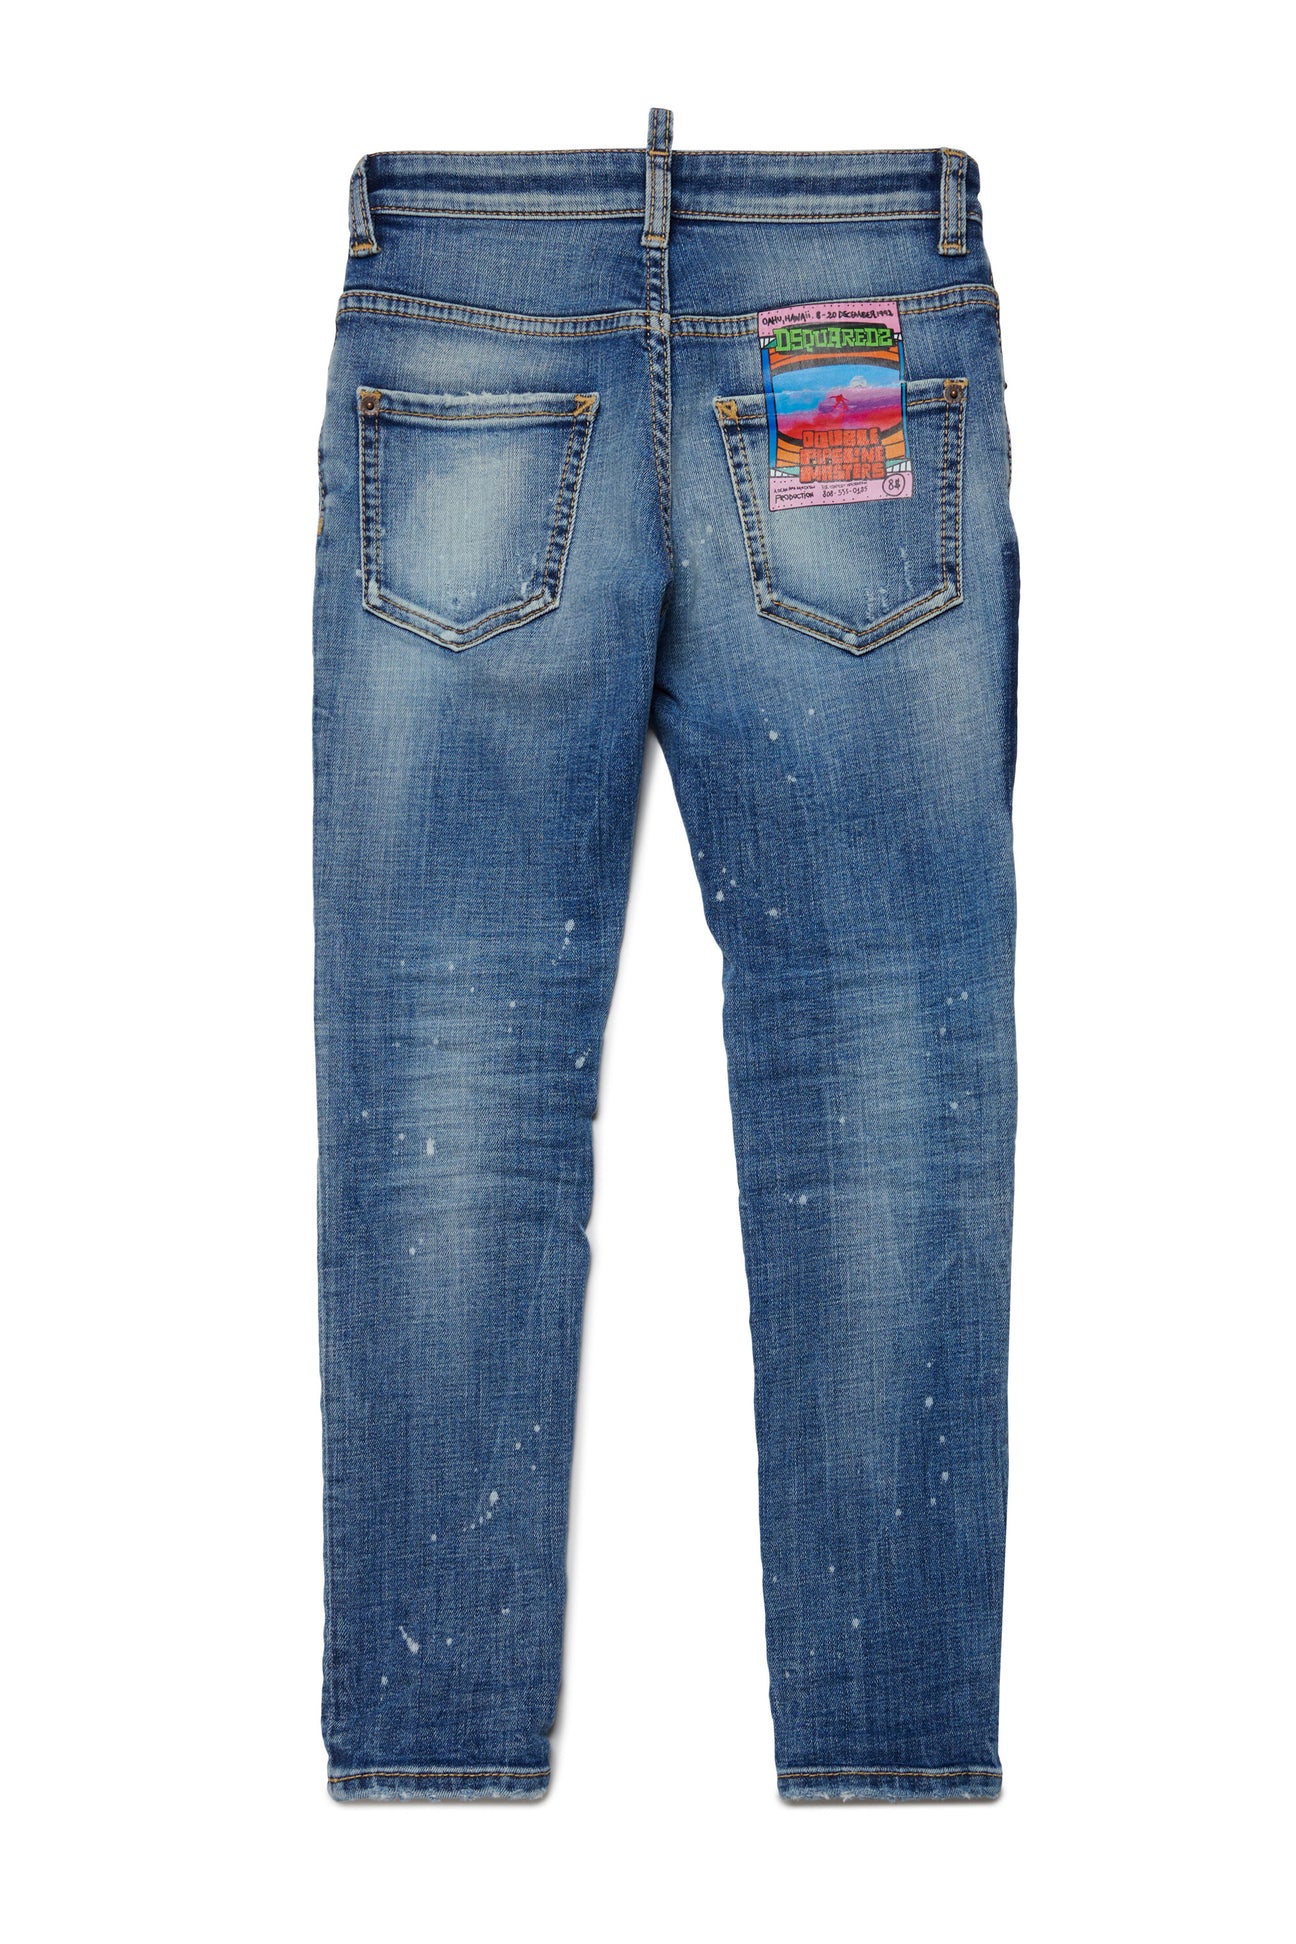 Shaded blue skinny jeans with breaks - Skater Shaded blue skinny jeans with breaks - Skater